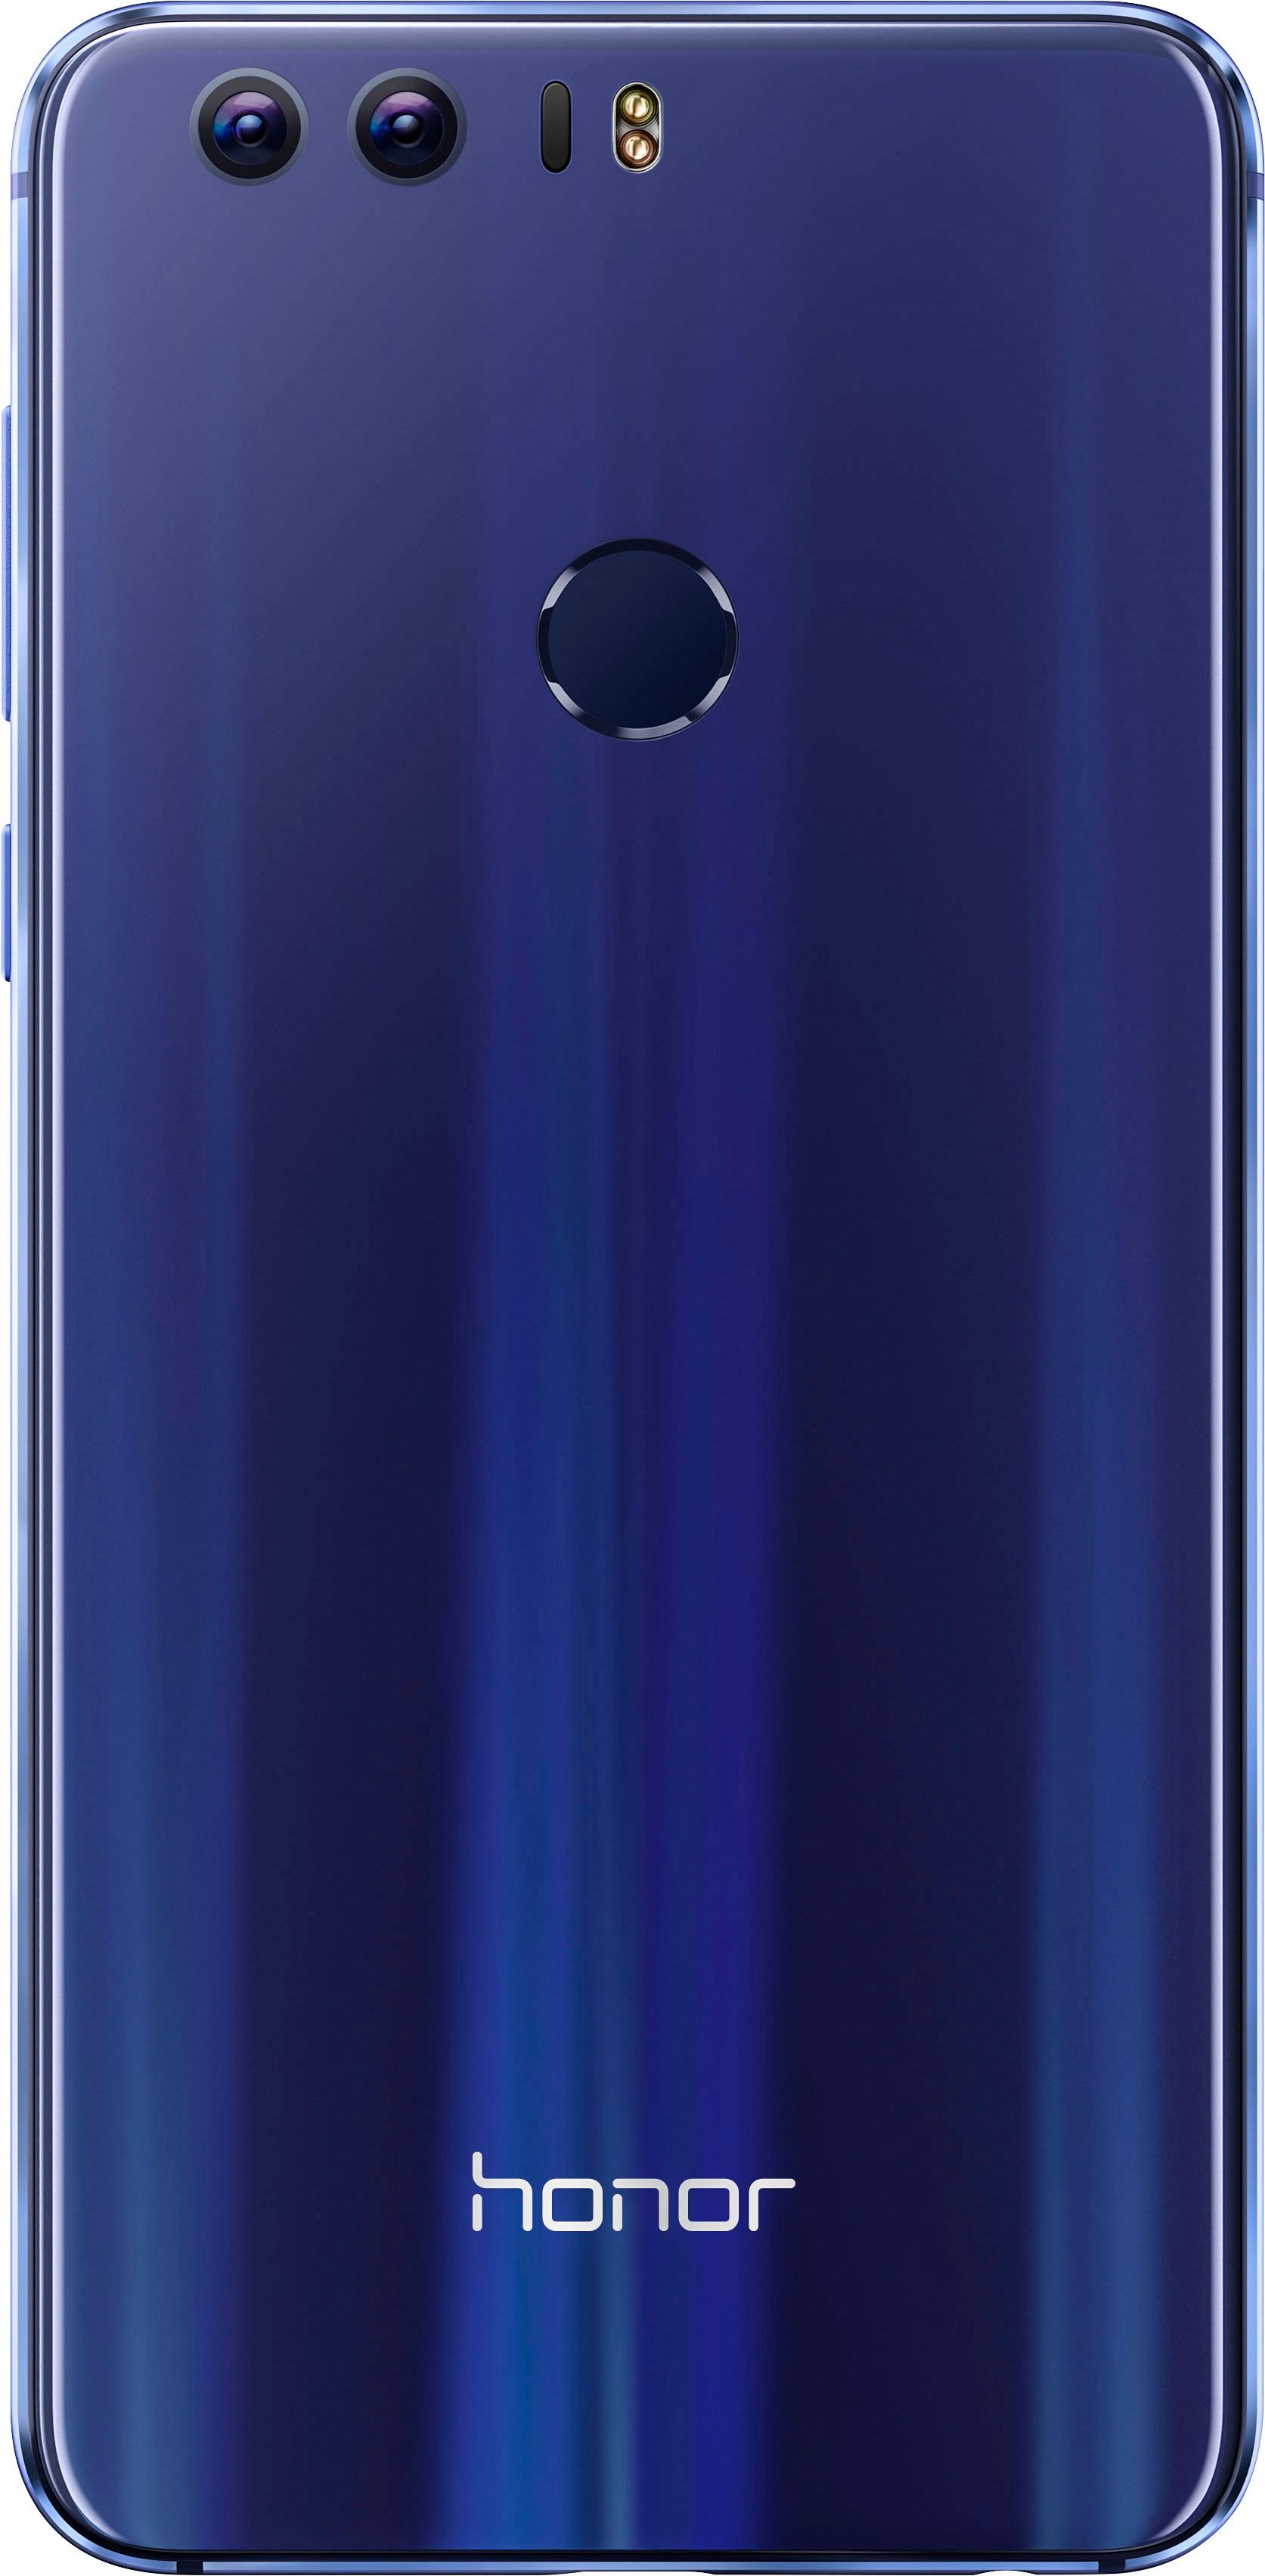 Best Buy: Huawei 8 4G LTE with Memory Cell Phone (Unlocked) blue FRD-L04